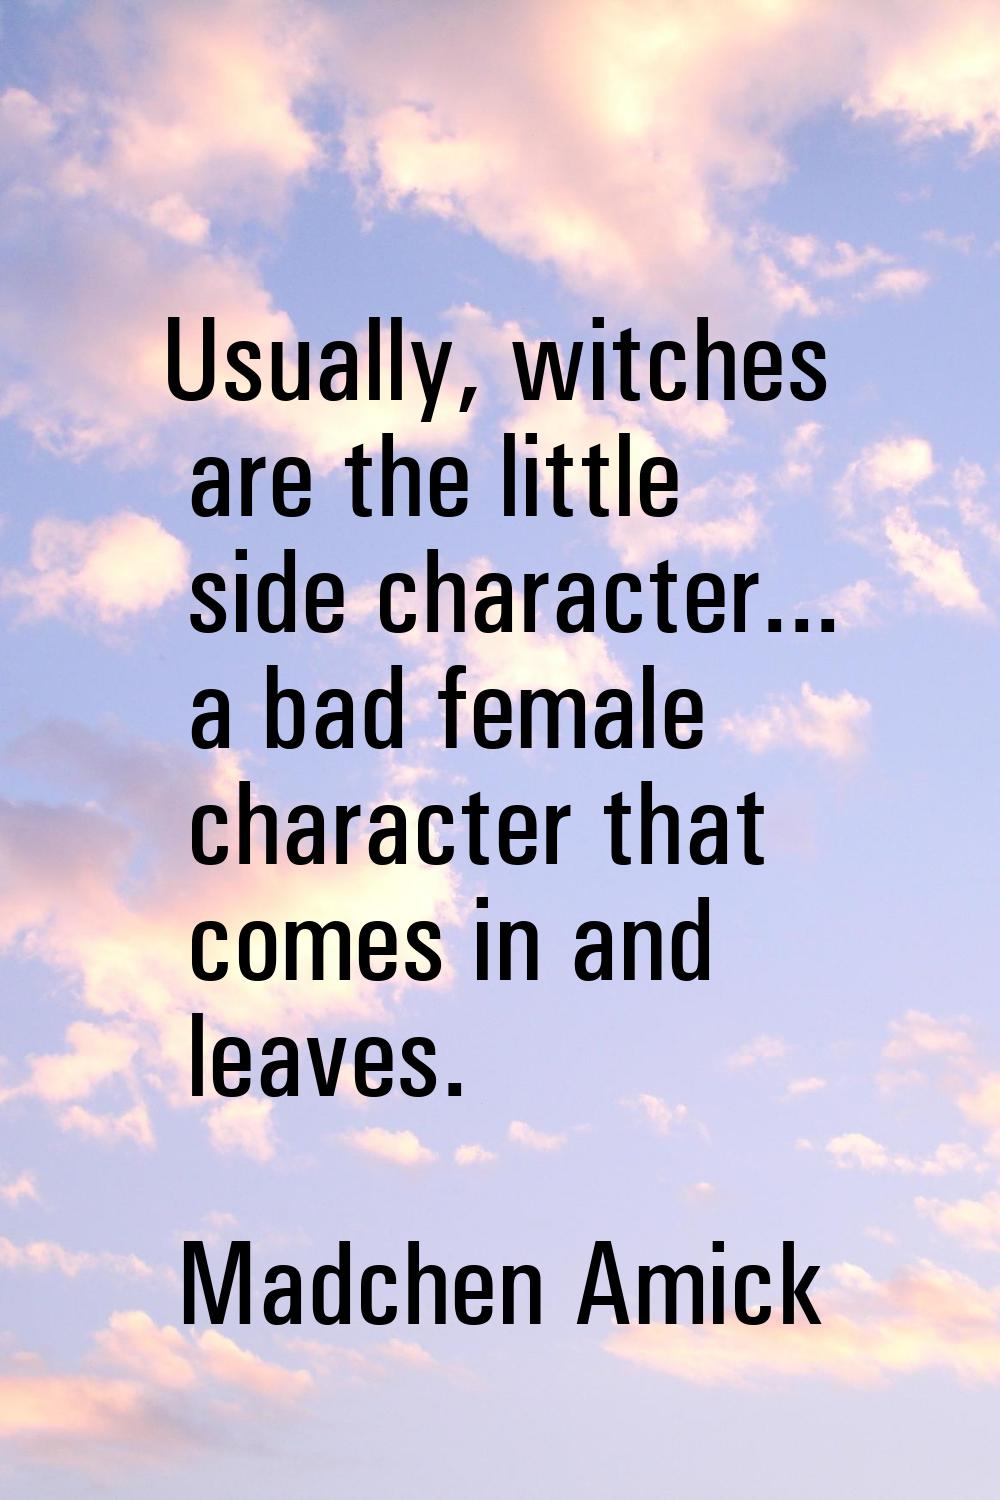 Usually, witches are the little side character... a bad female character that comes in and leaves.